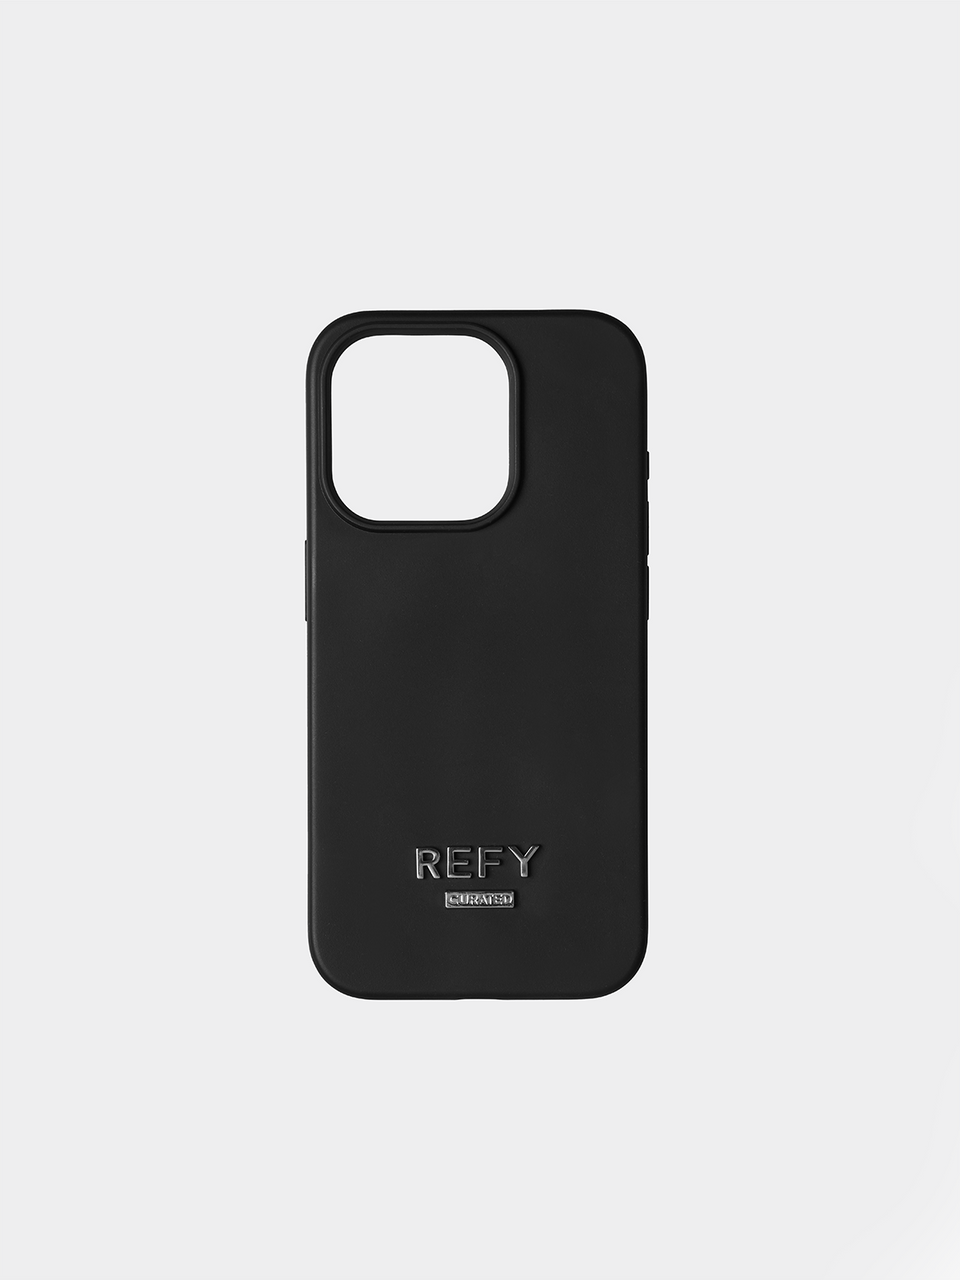 FRONT IMAGE OF REFY CURATED IPHONE CASE IN BLACK